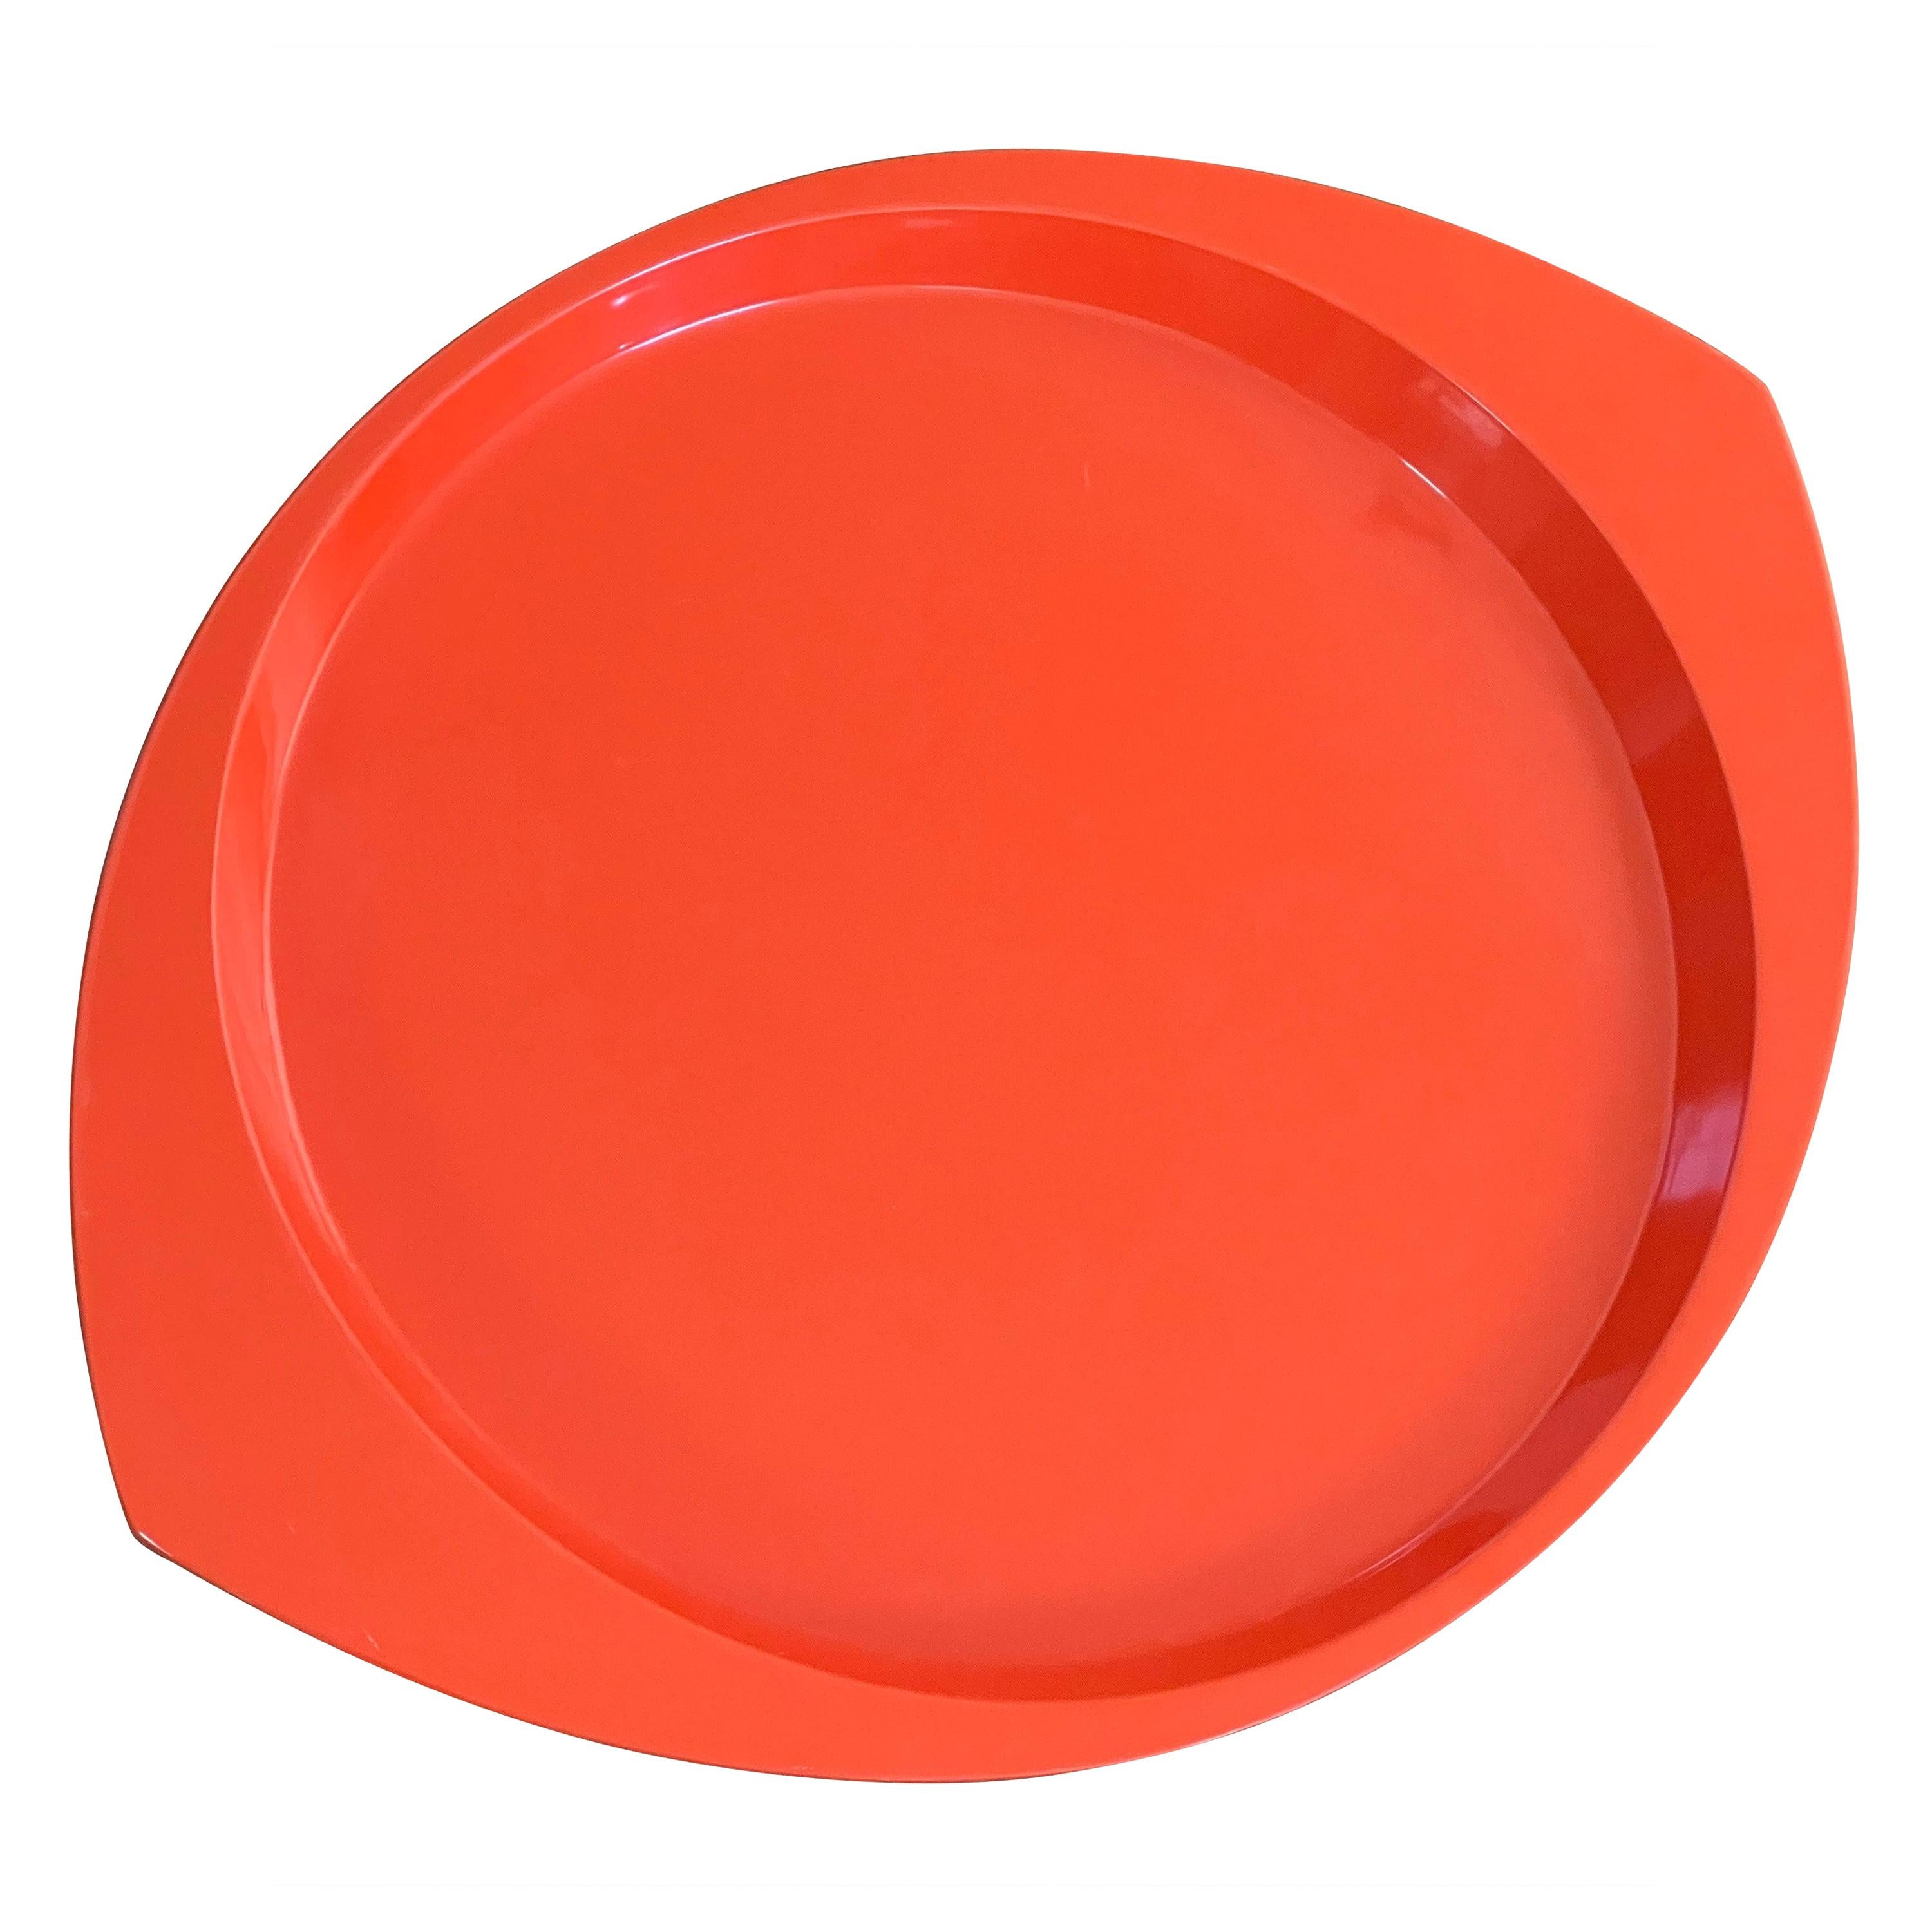 Large Oval Orange Lacquer Tray by Jens Quistgaard for Dansk, Early Production